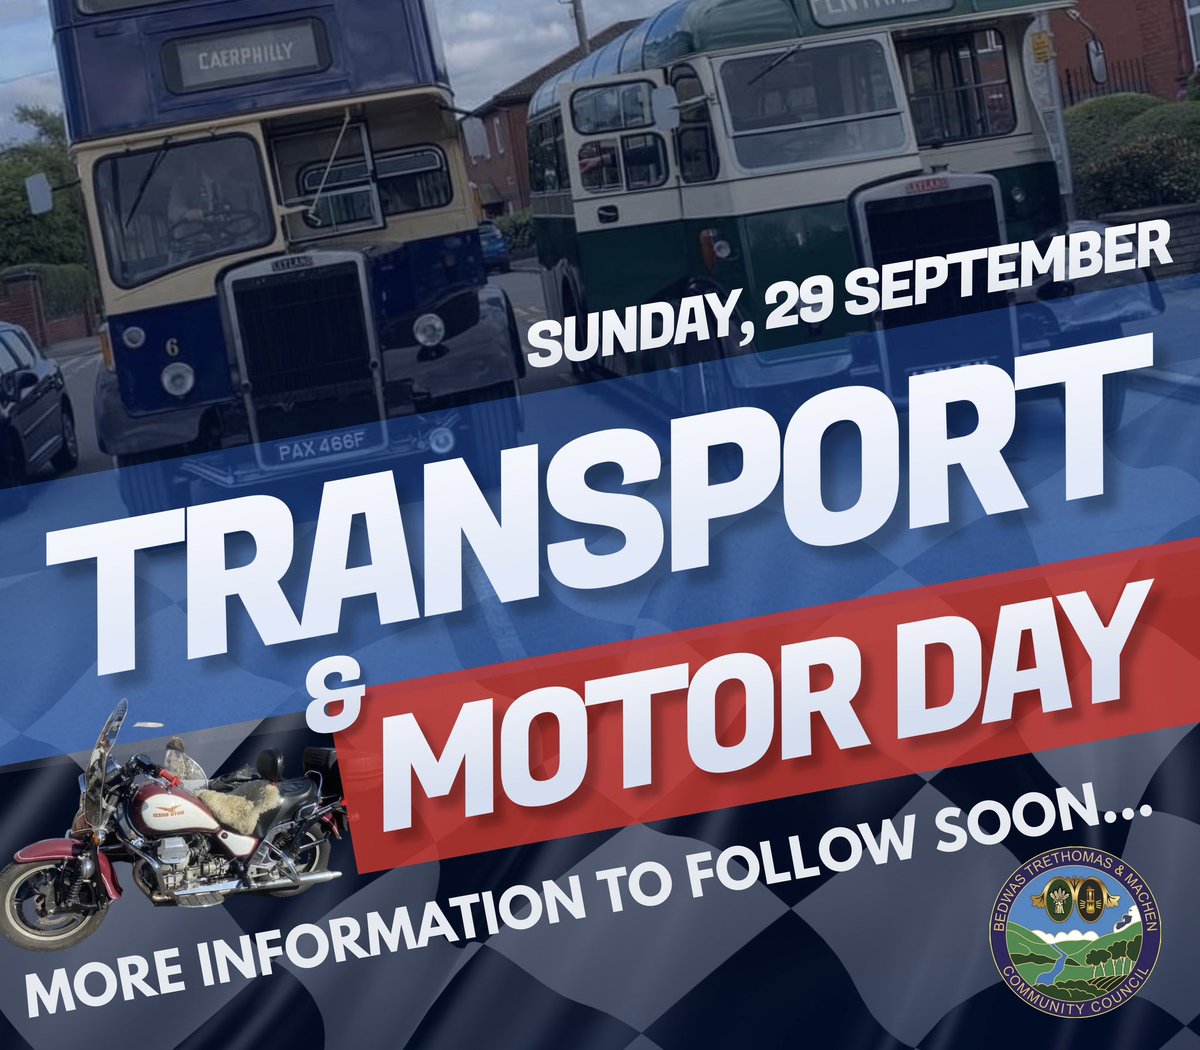 🚎  Save the Date 🚎

Transport & Motor Day 
Sunday, 29 September 2024

Sponsored by BTM Community Council

More information to follow soon. 

#BTMCC #Family #Community #BTMarea #GYRarea